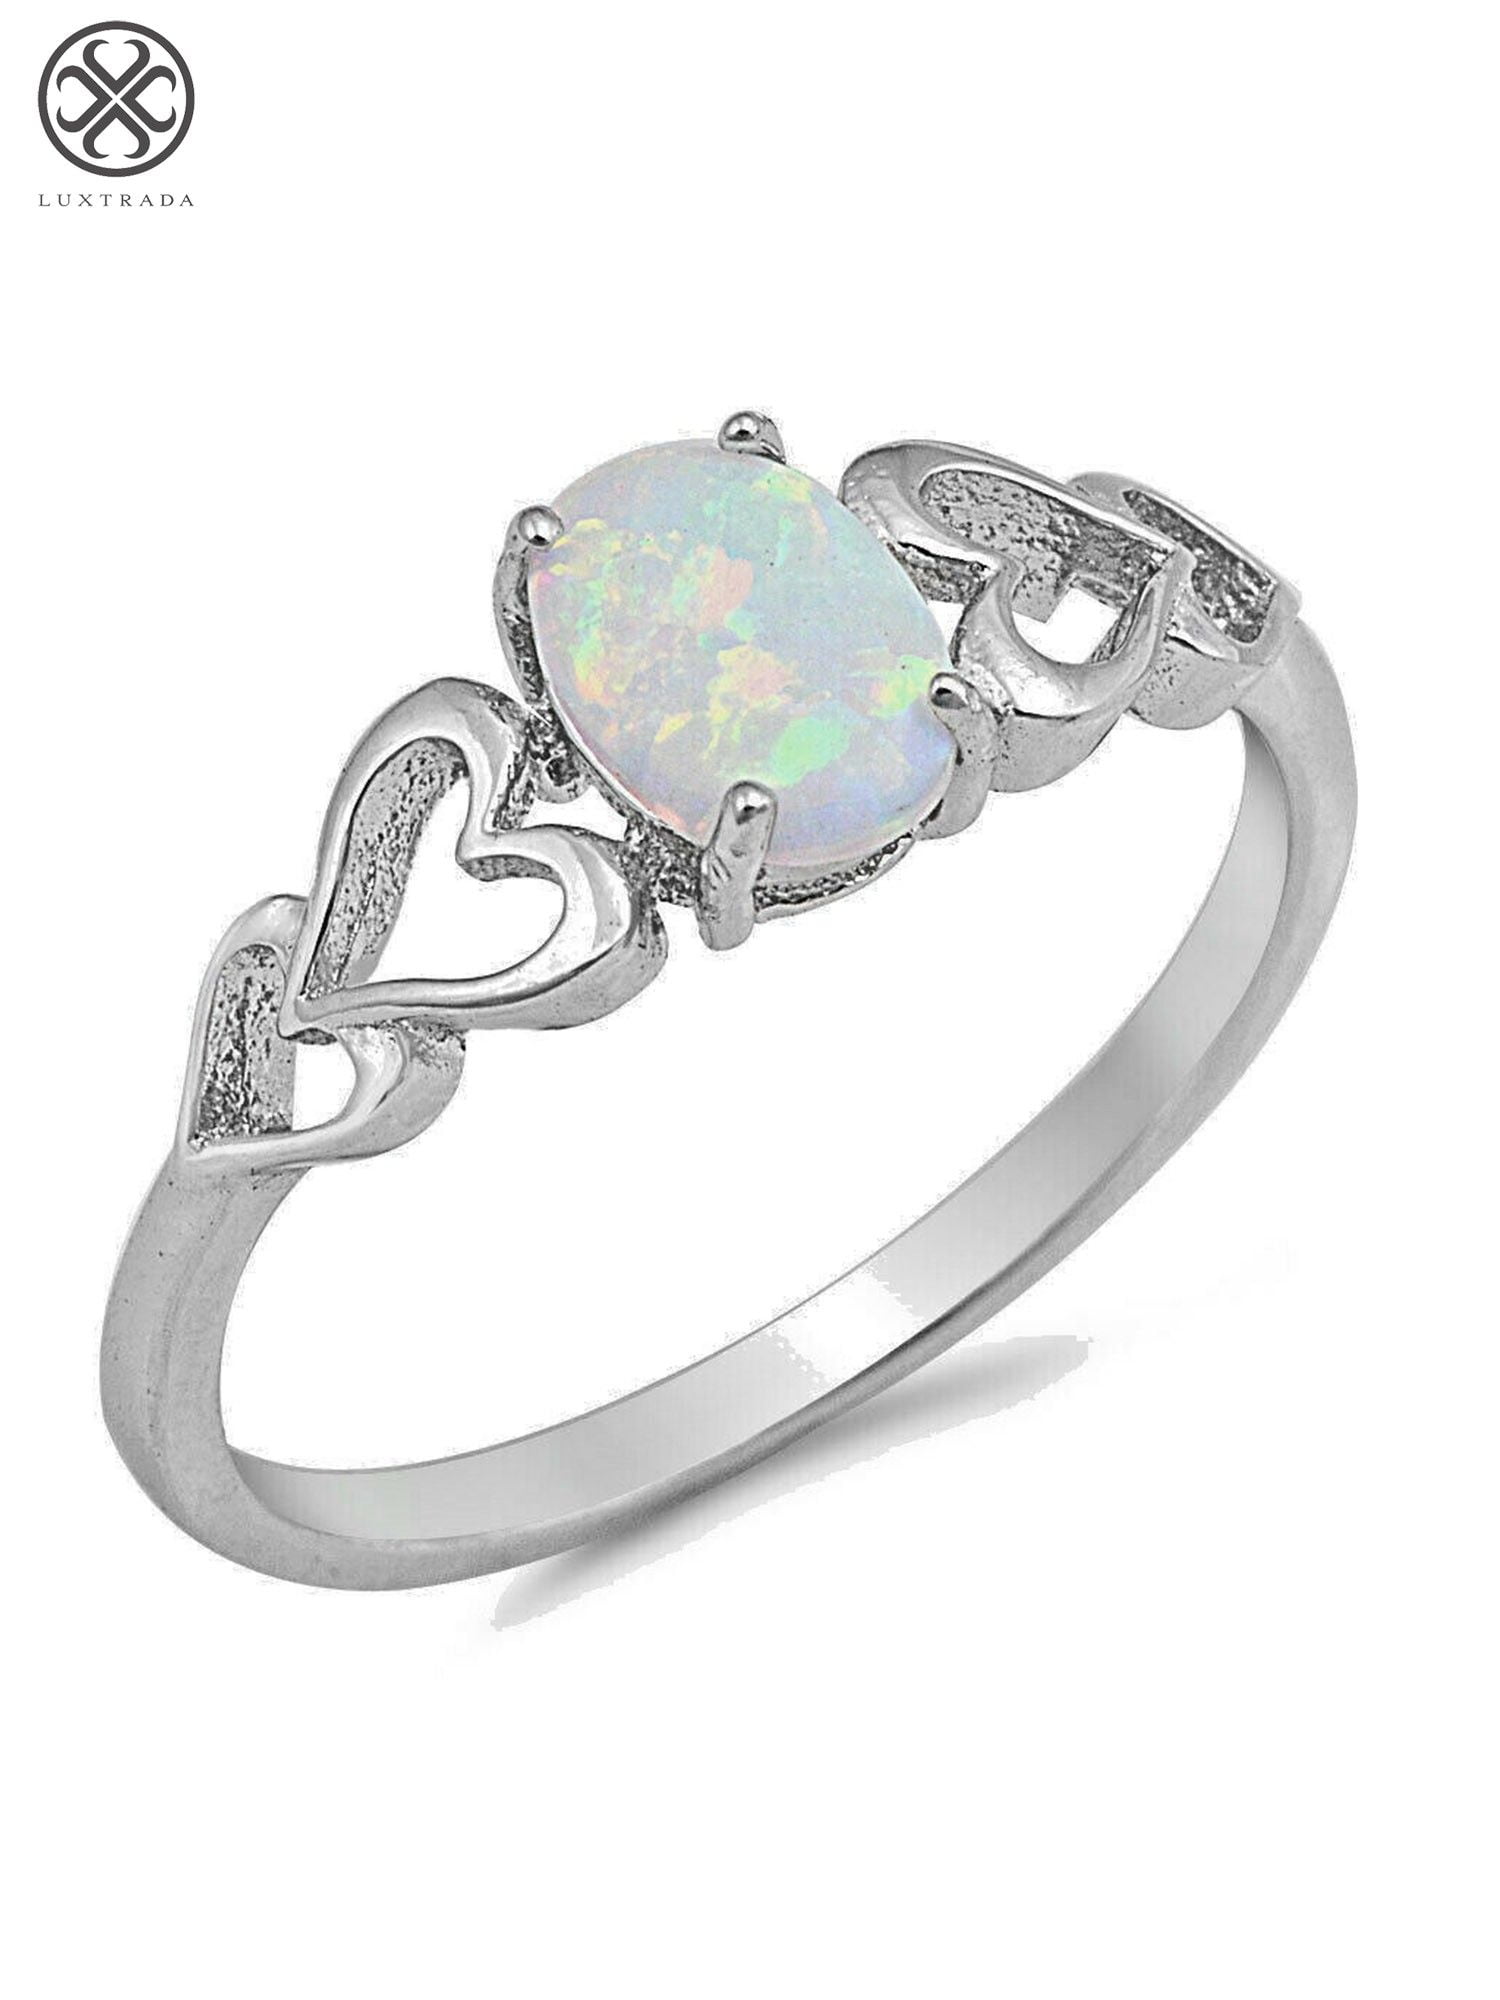 Anniversary Ring Design Sterling Silver 925 Design Lab Opal Size 5 6 7 8 9 10 